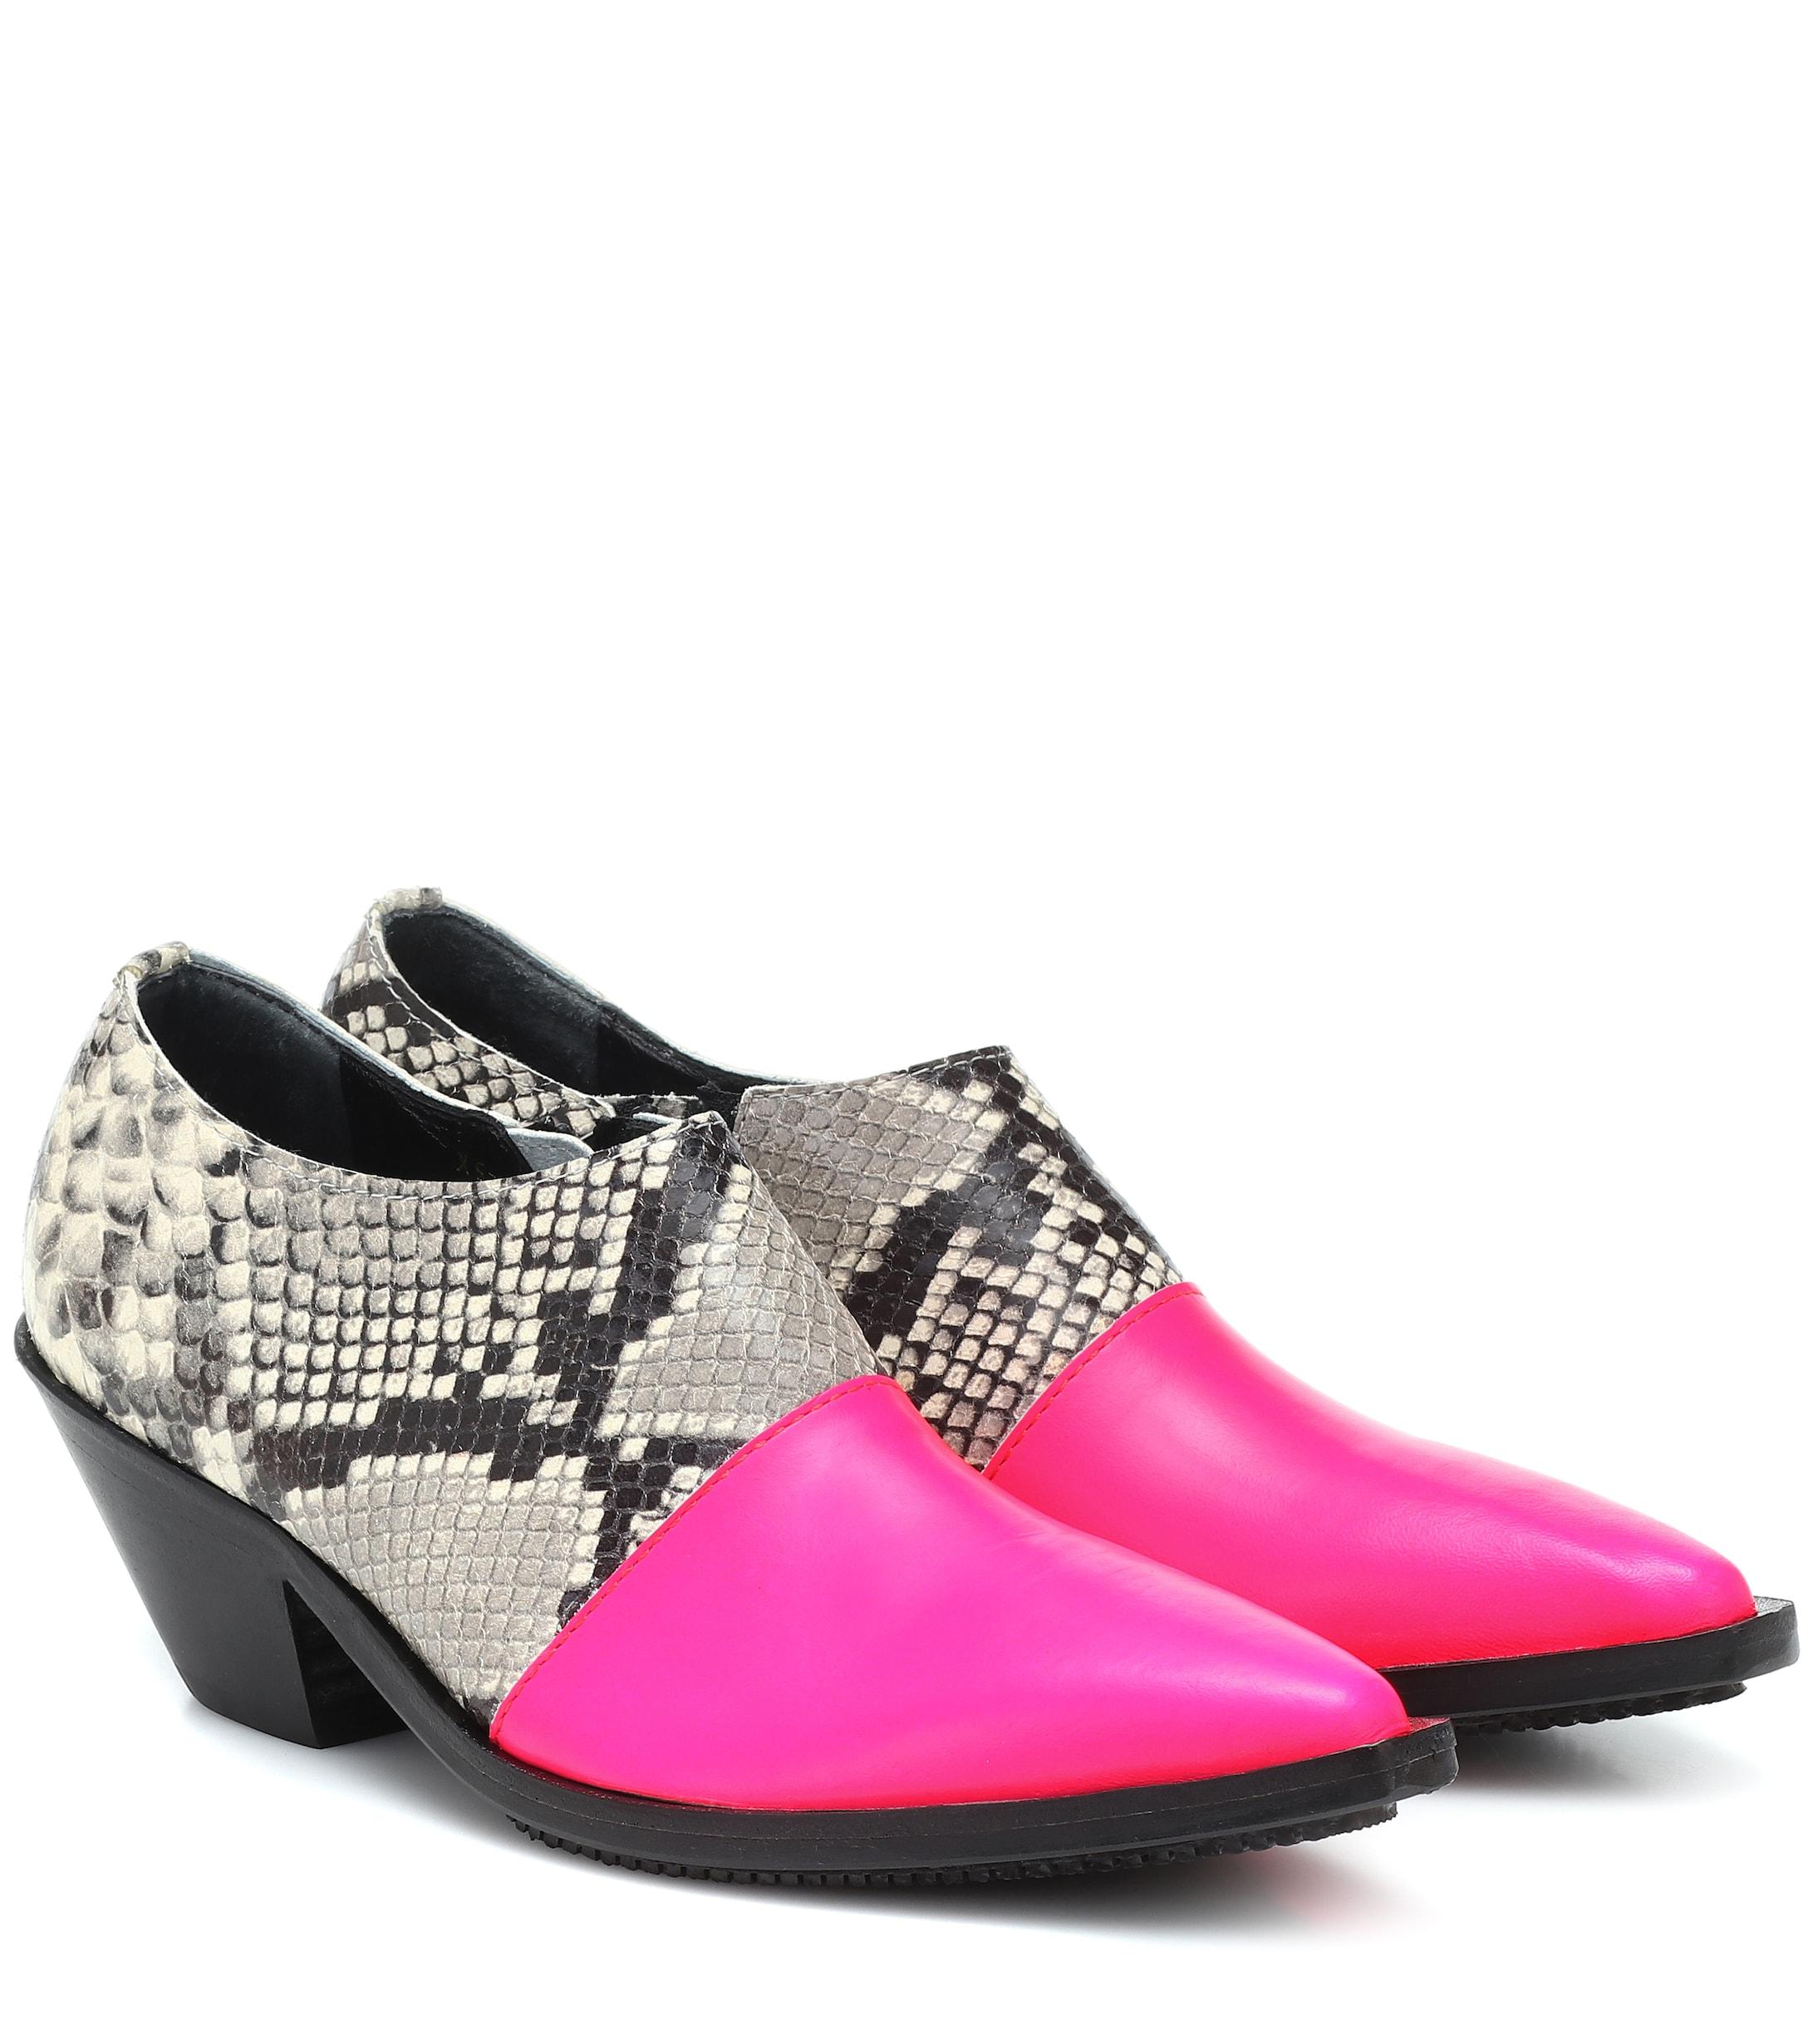 Junya Watanabe Snake-effect Leather Ankle Boots in Pink - Lyst